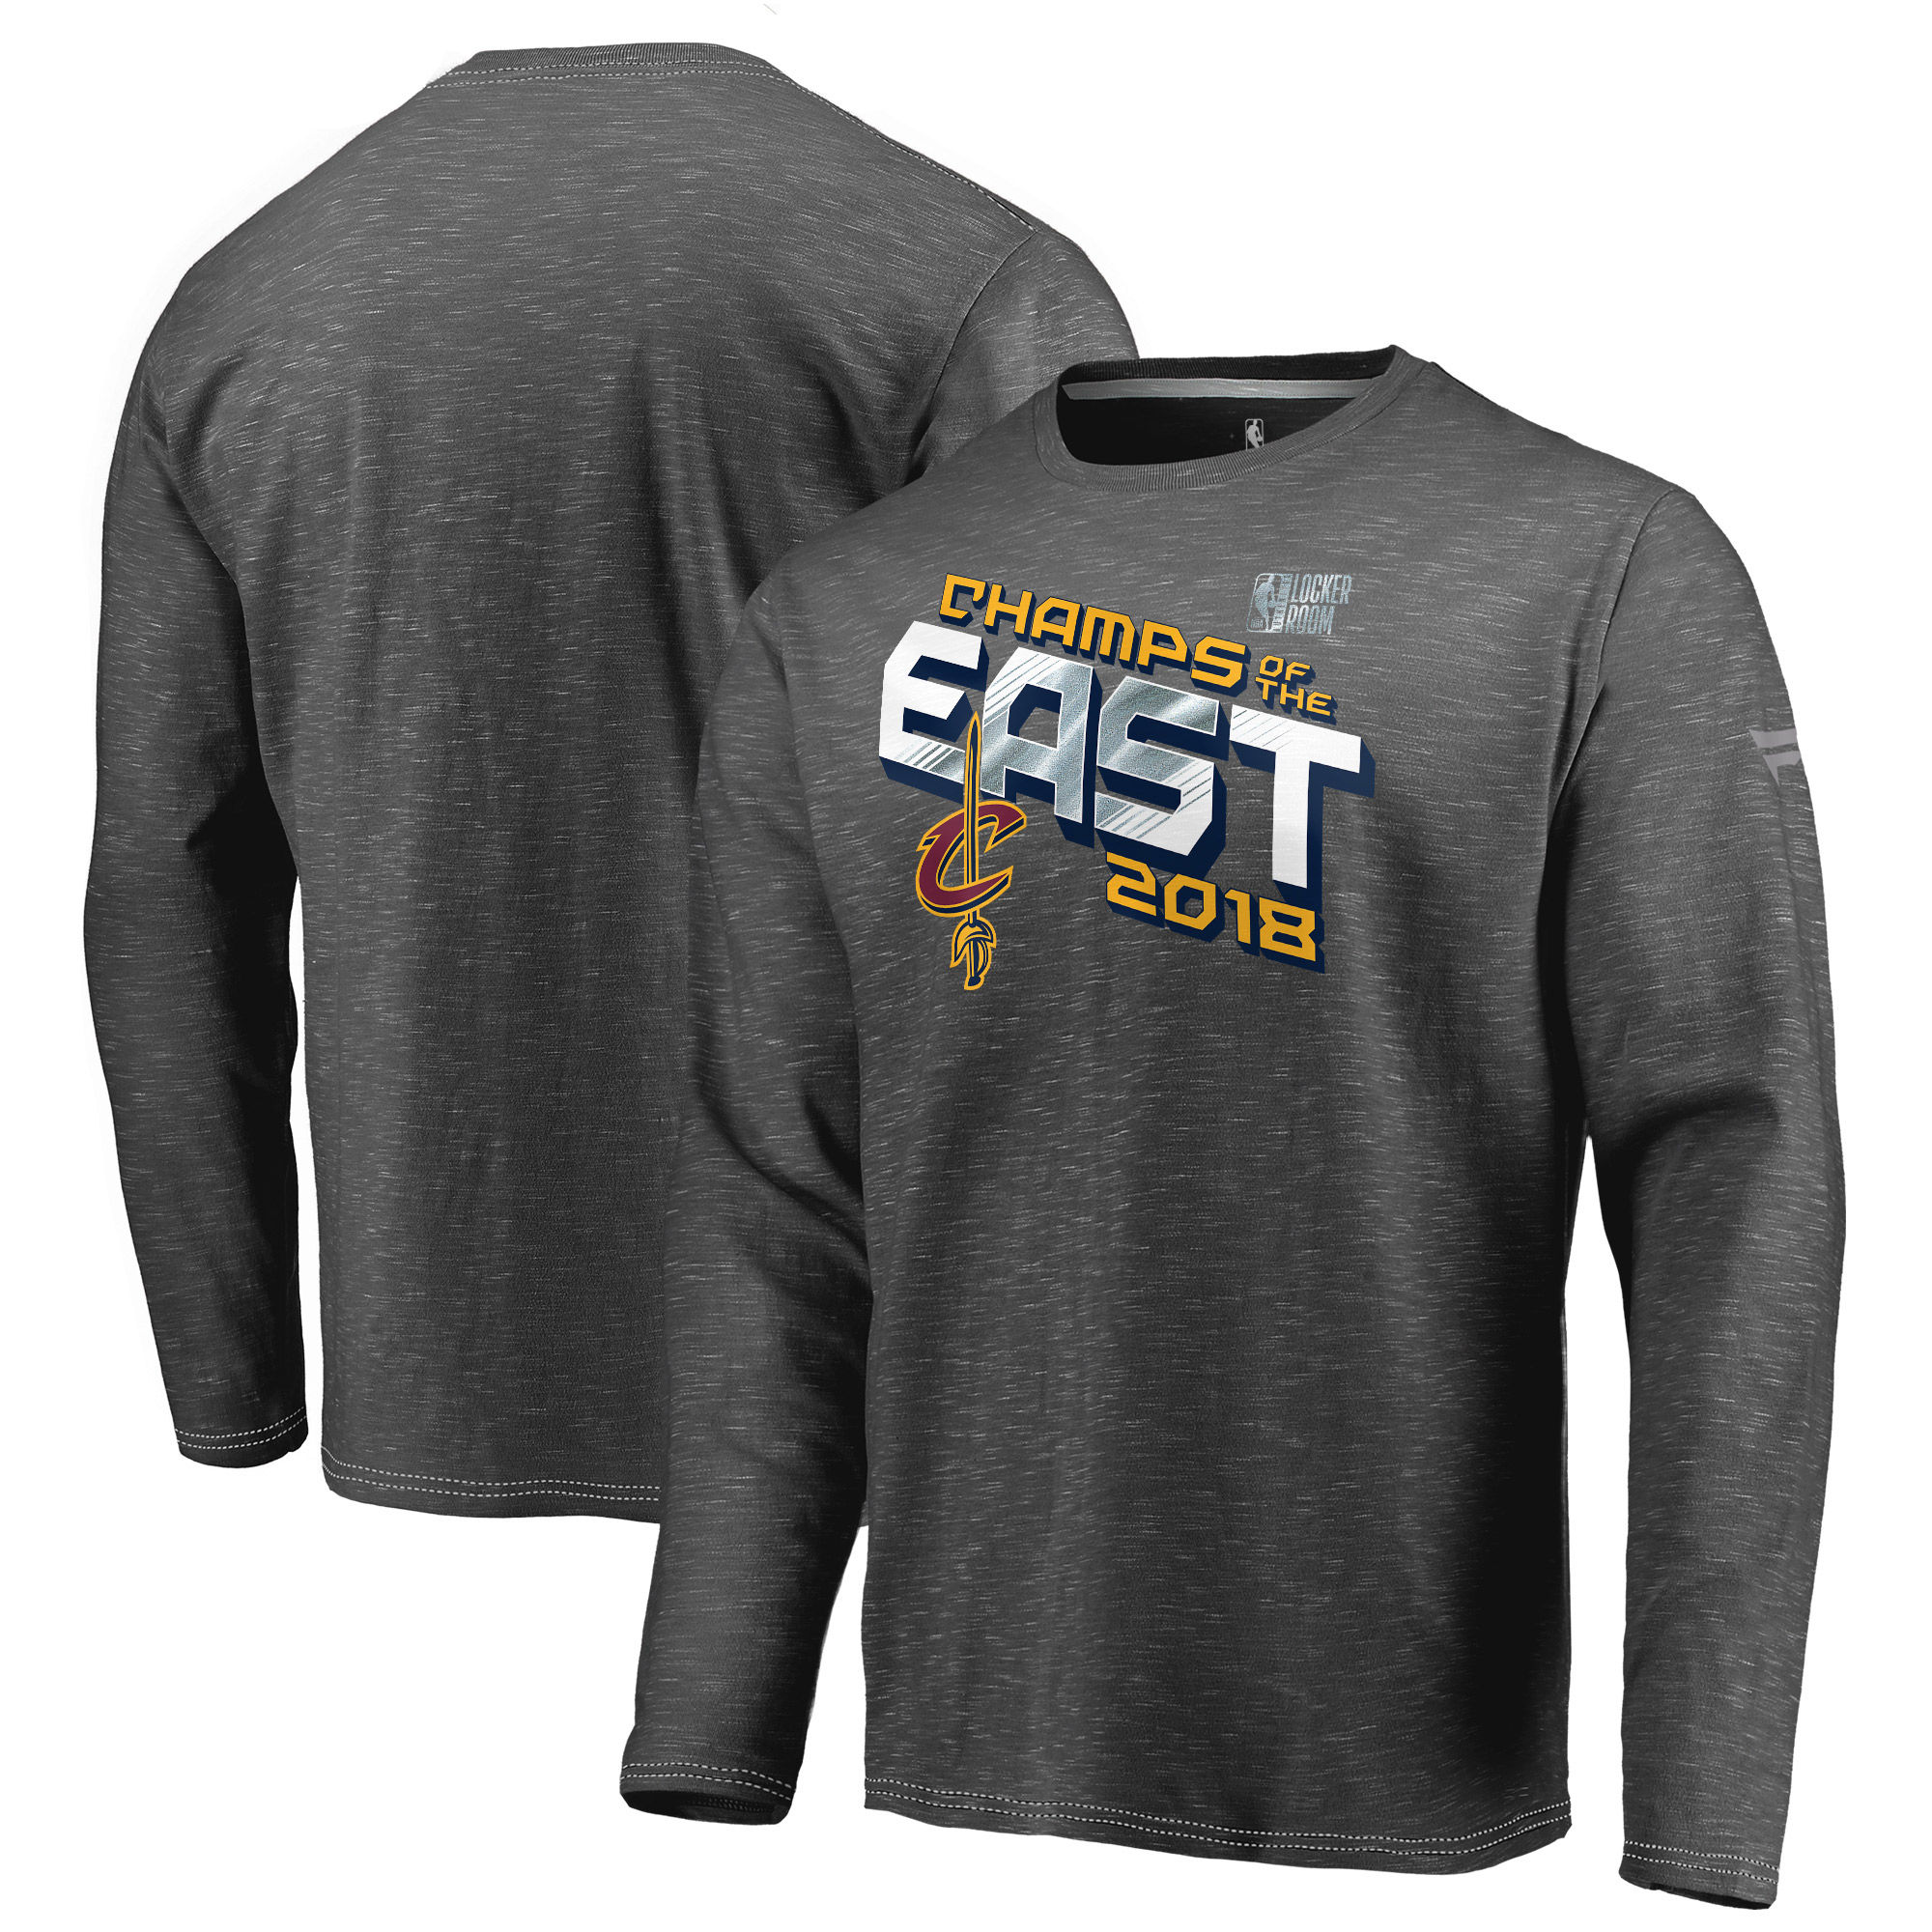 Cleveland Cavaliers Fanatics Branded 2018 Eastern Conference Champions Locker Room Long Sleeve T-Shirt Heather Charcoal